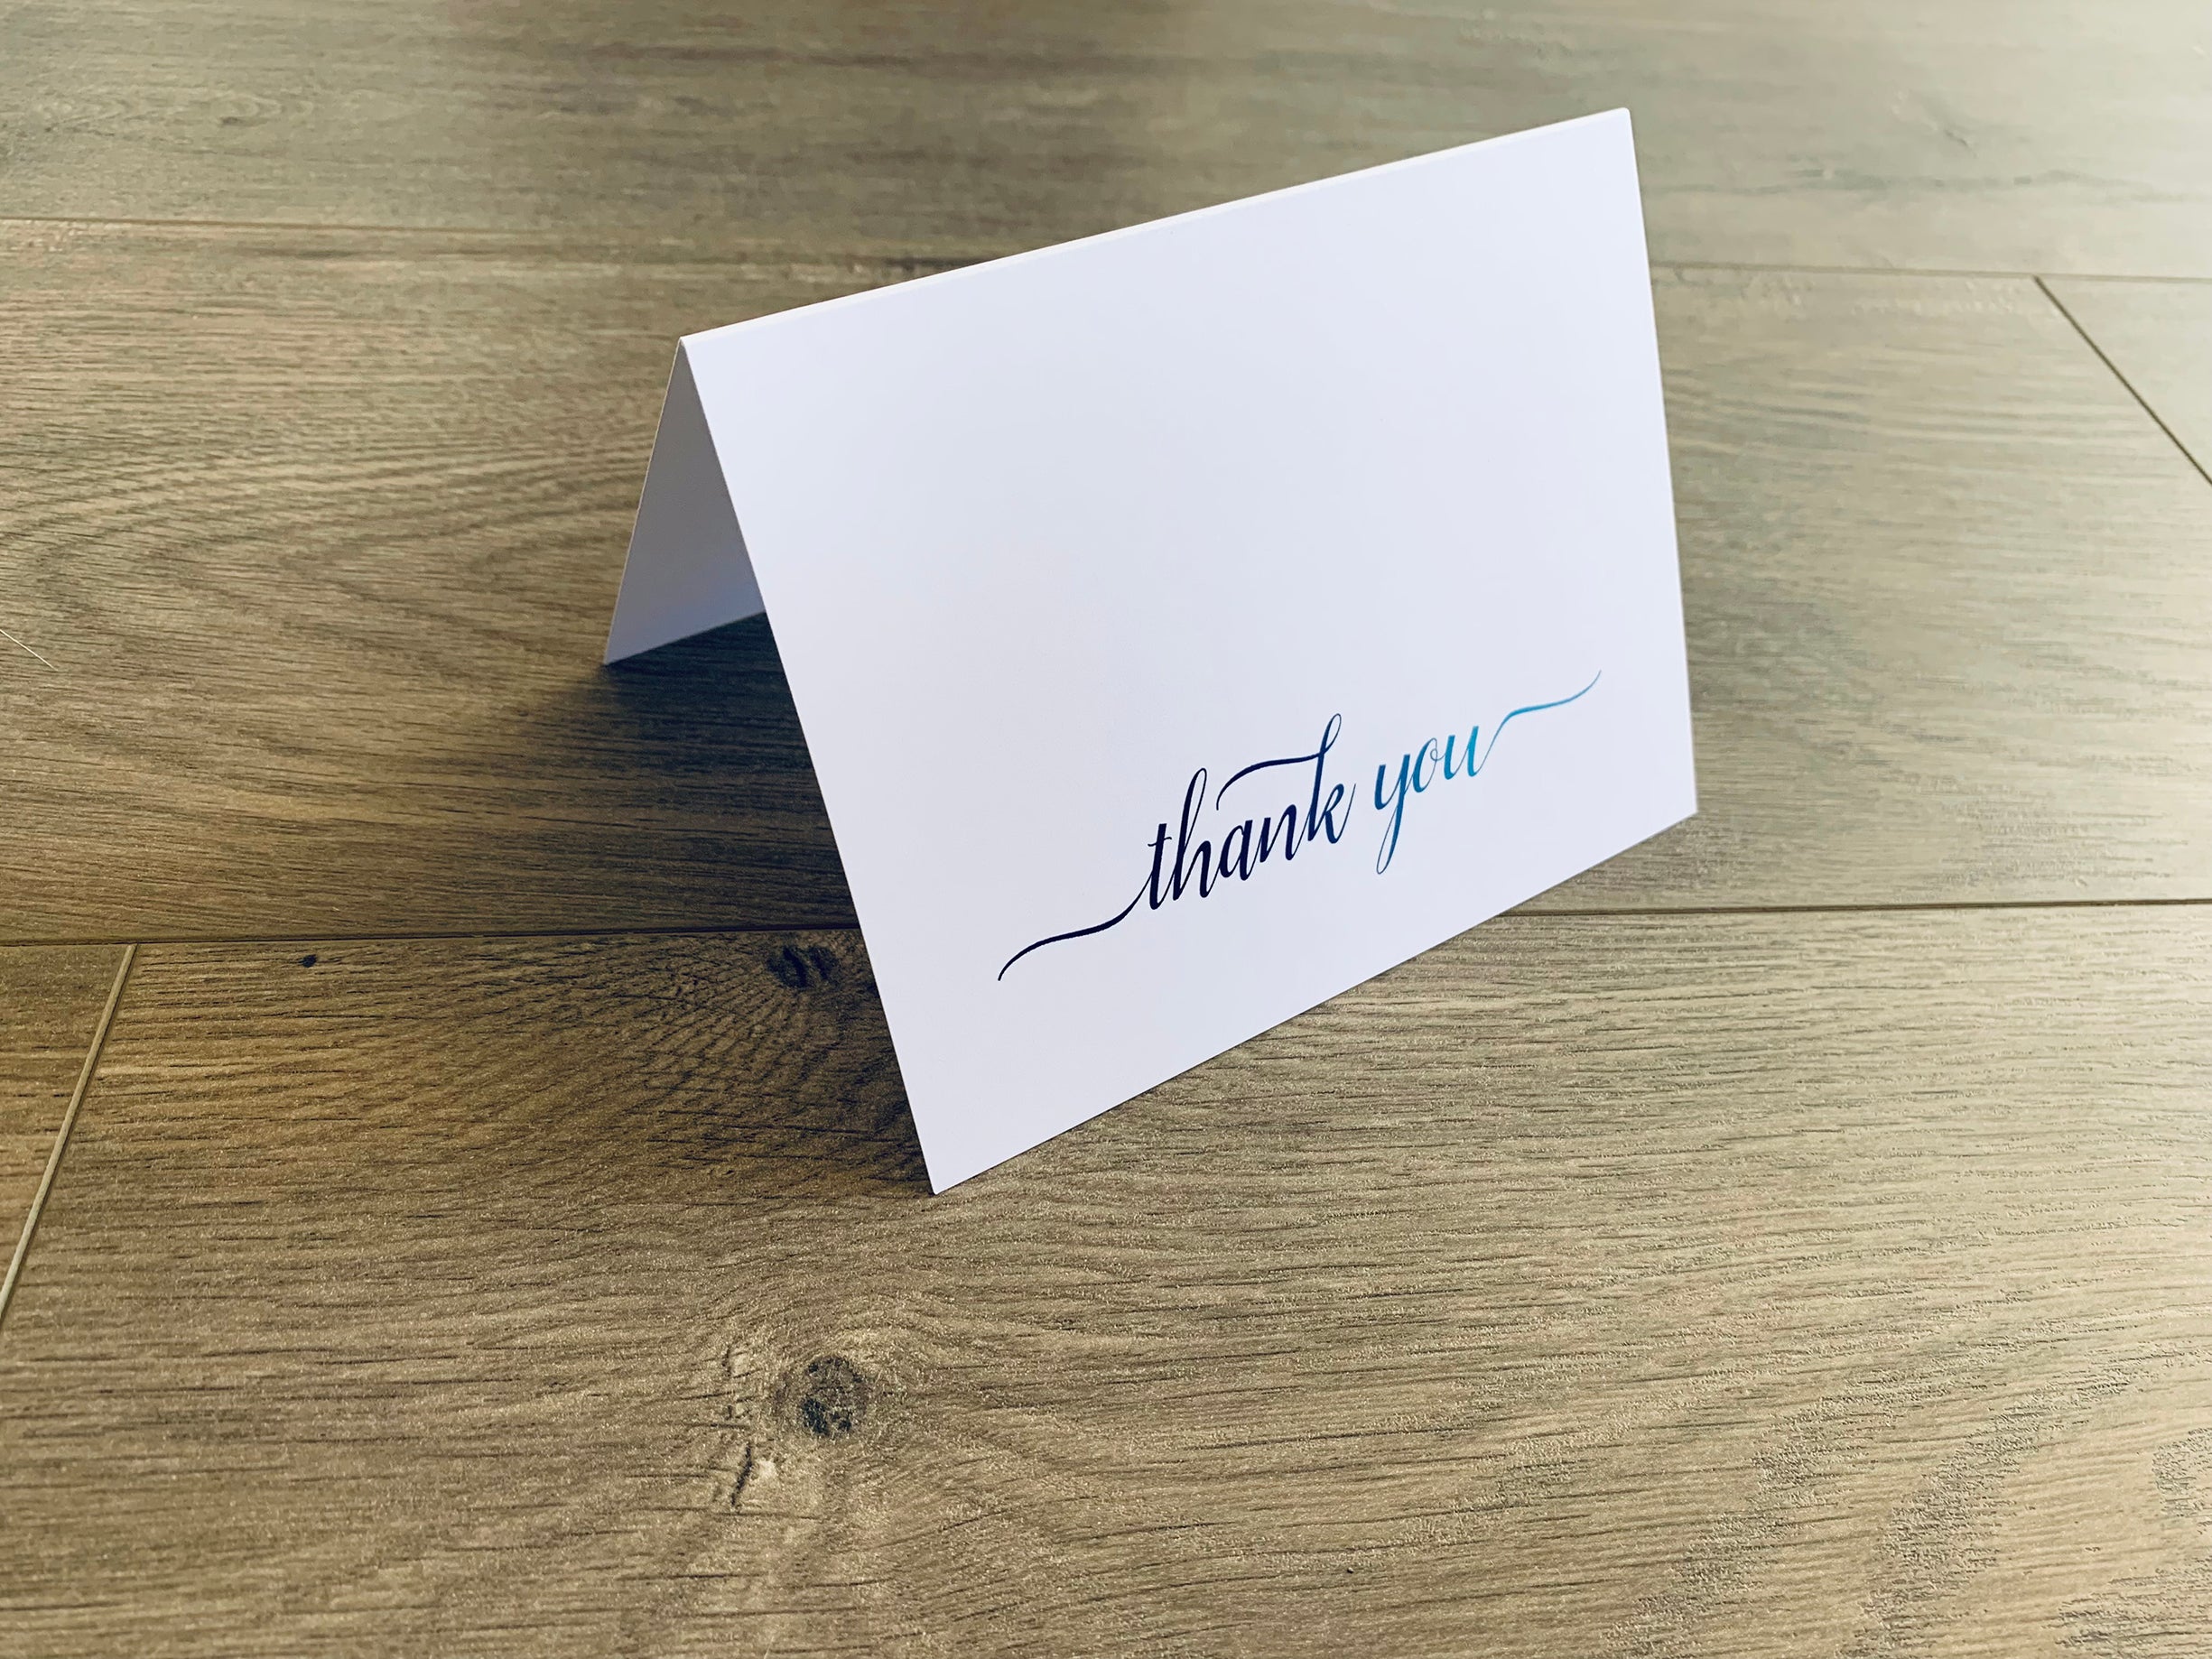 A white notecard with a script font that reads "thank you" sits on a wooden floor. The font fades from navy to light blue.